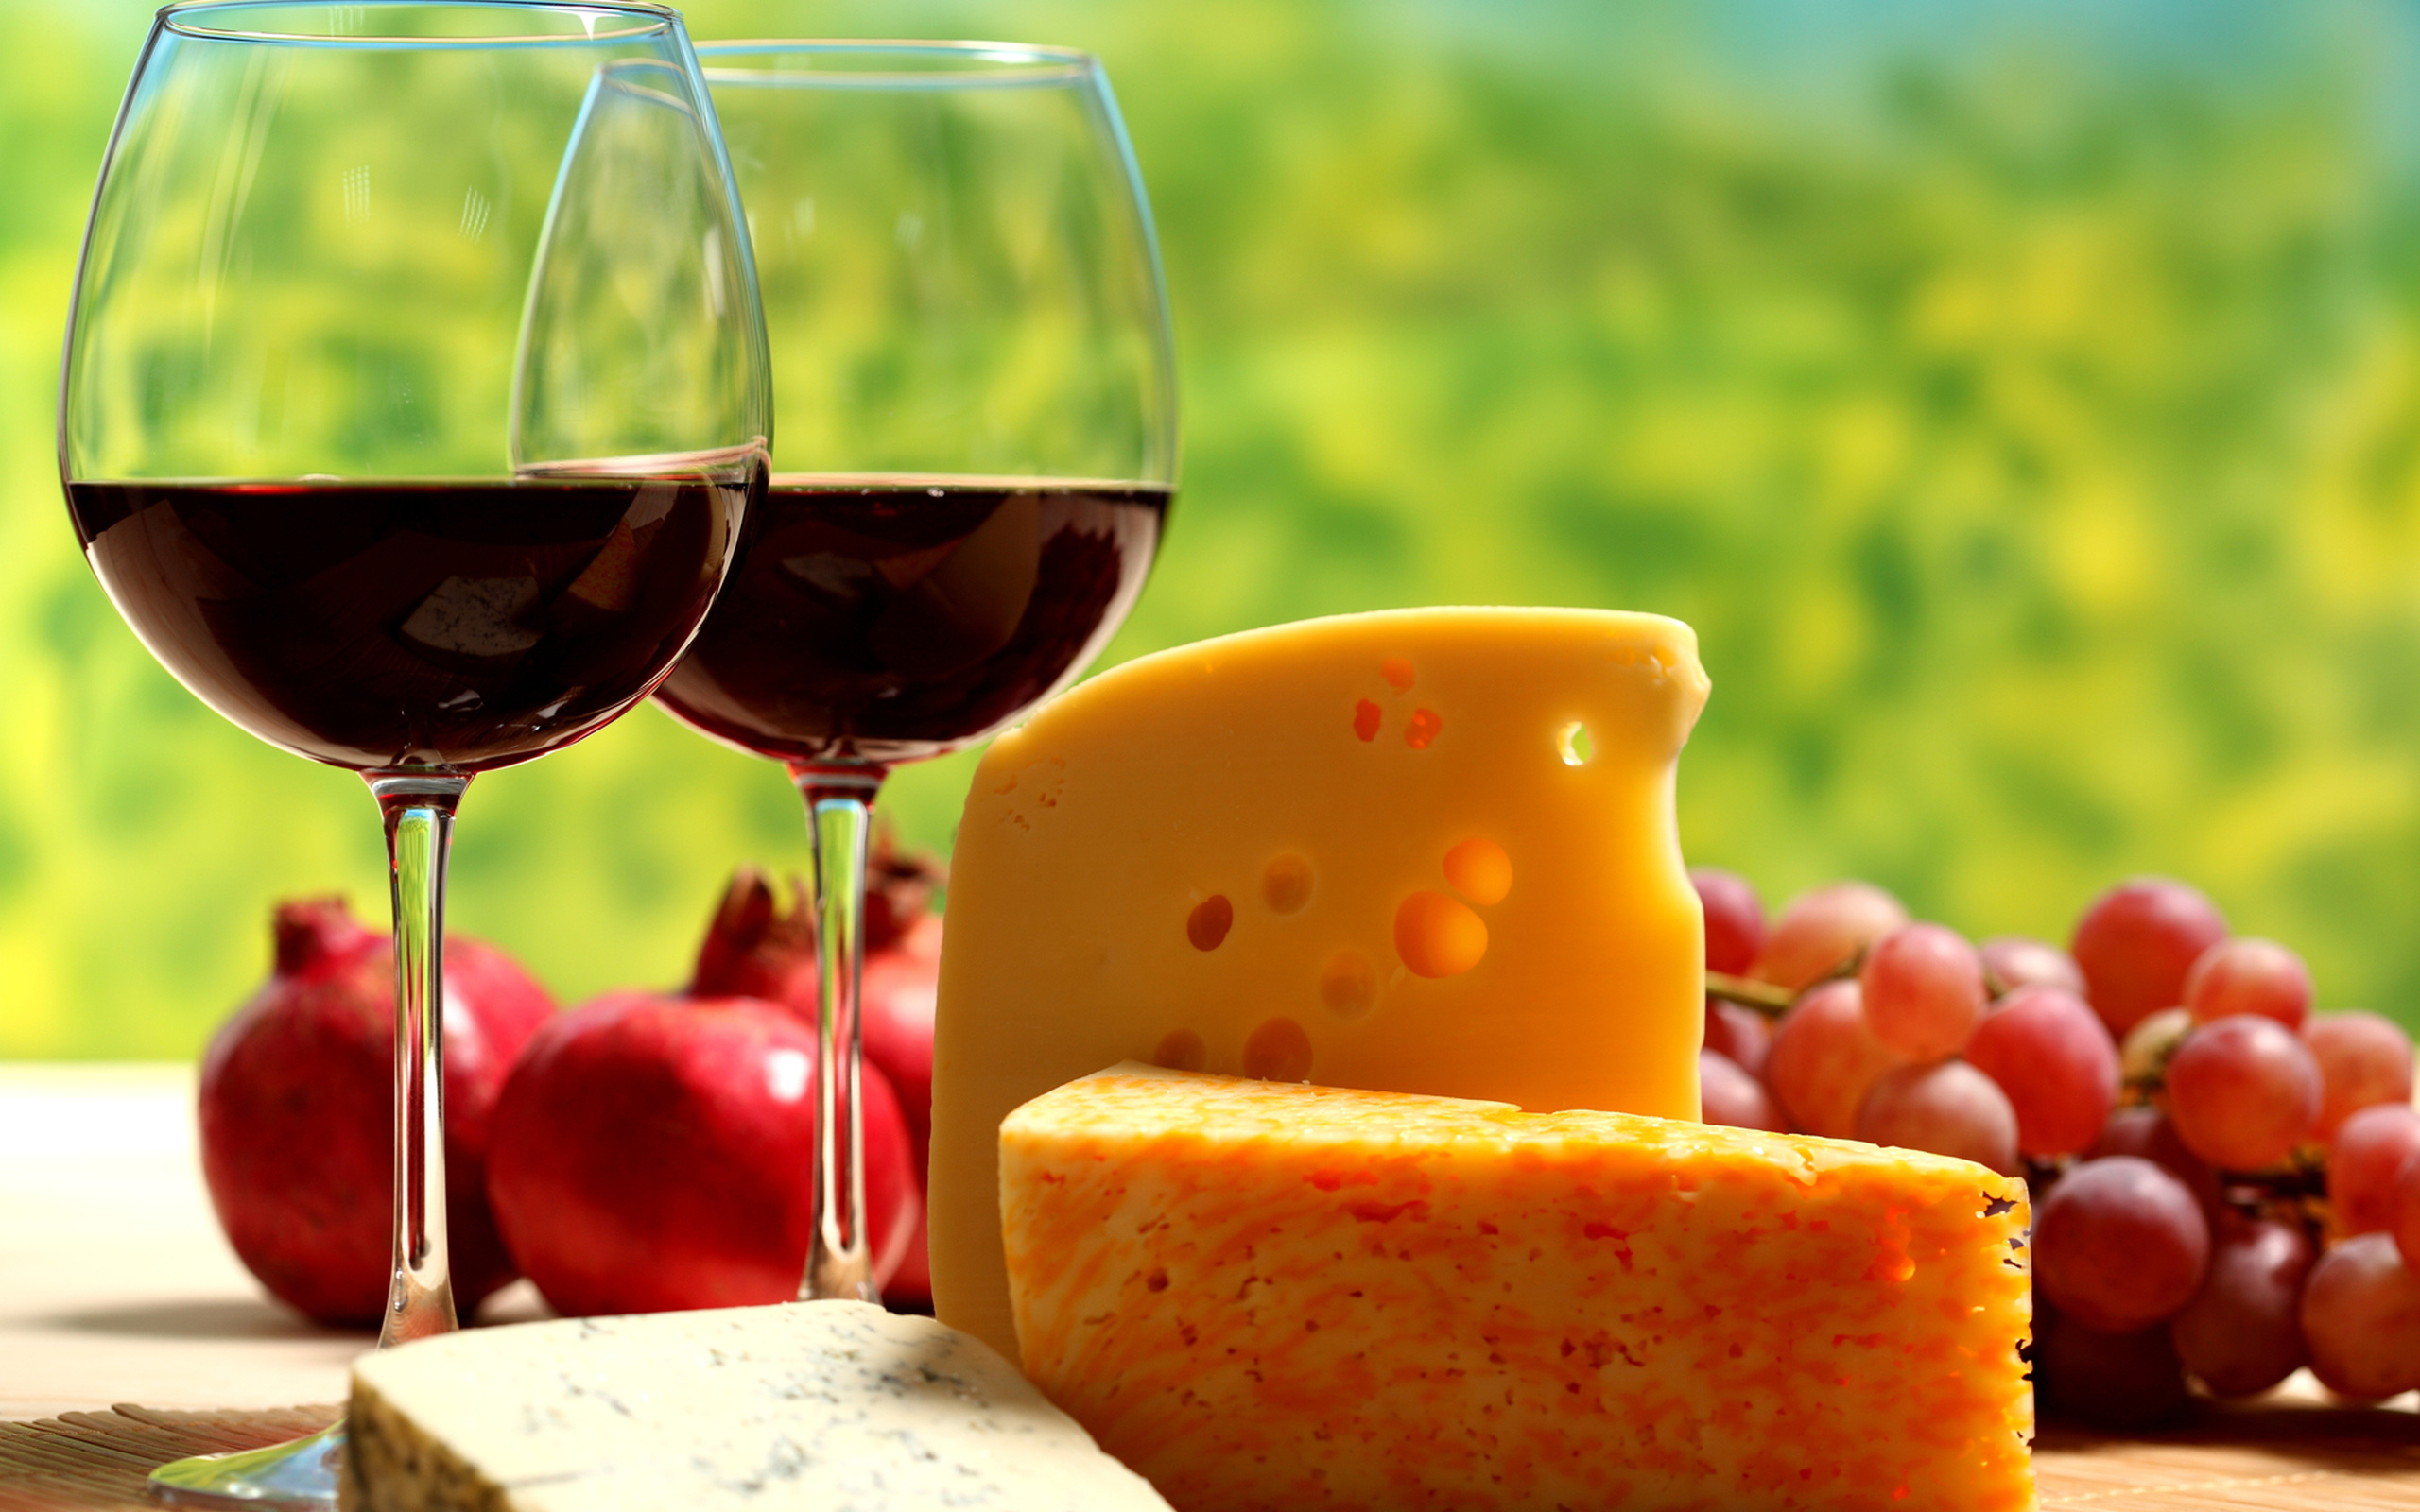  - red-wine-glasses-and-cheese